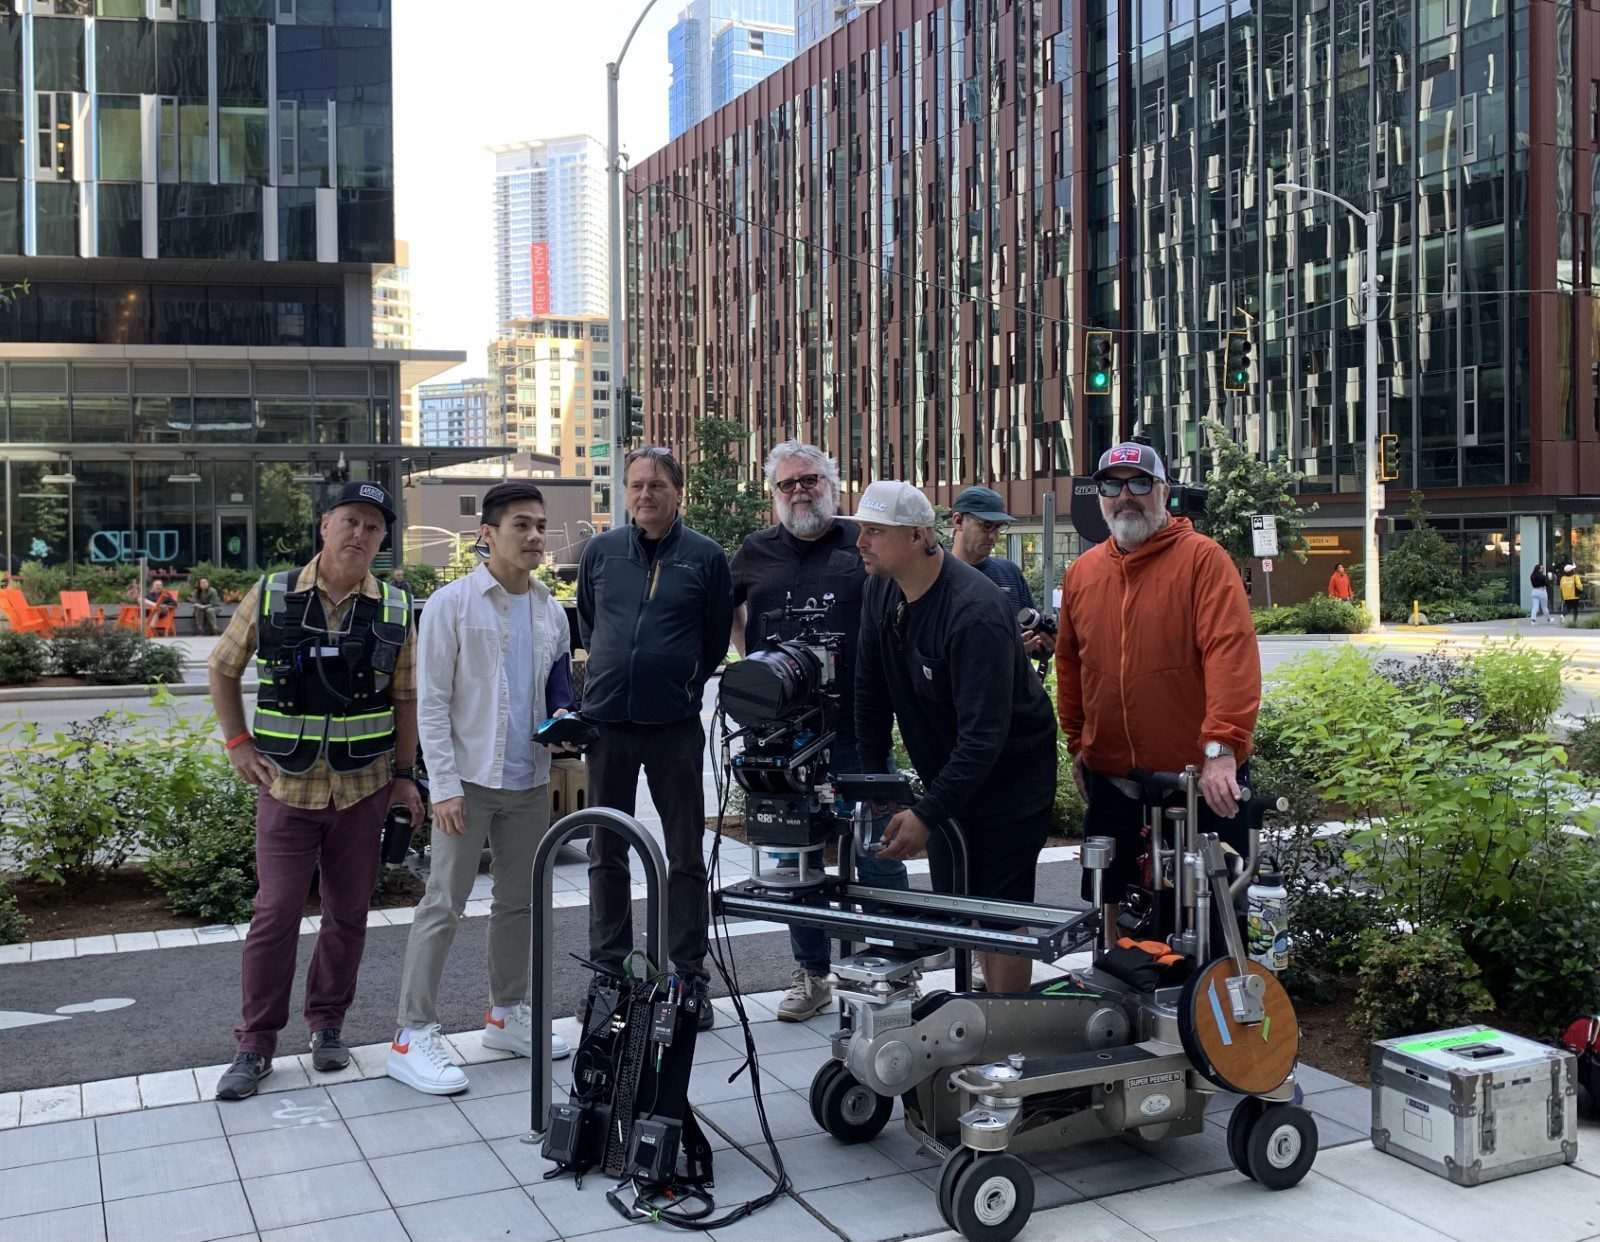 OED Film Program Manager Chris Swenson with the Infinity film crew in South Lake Union.